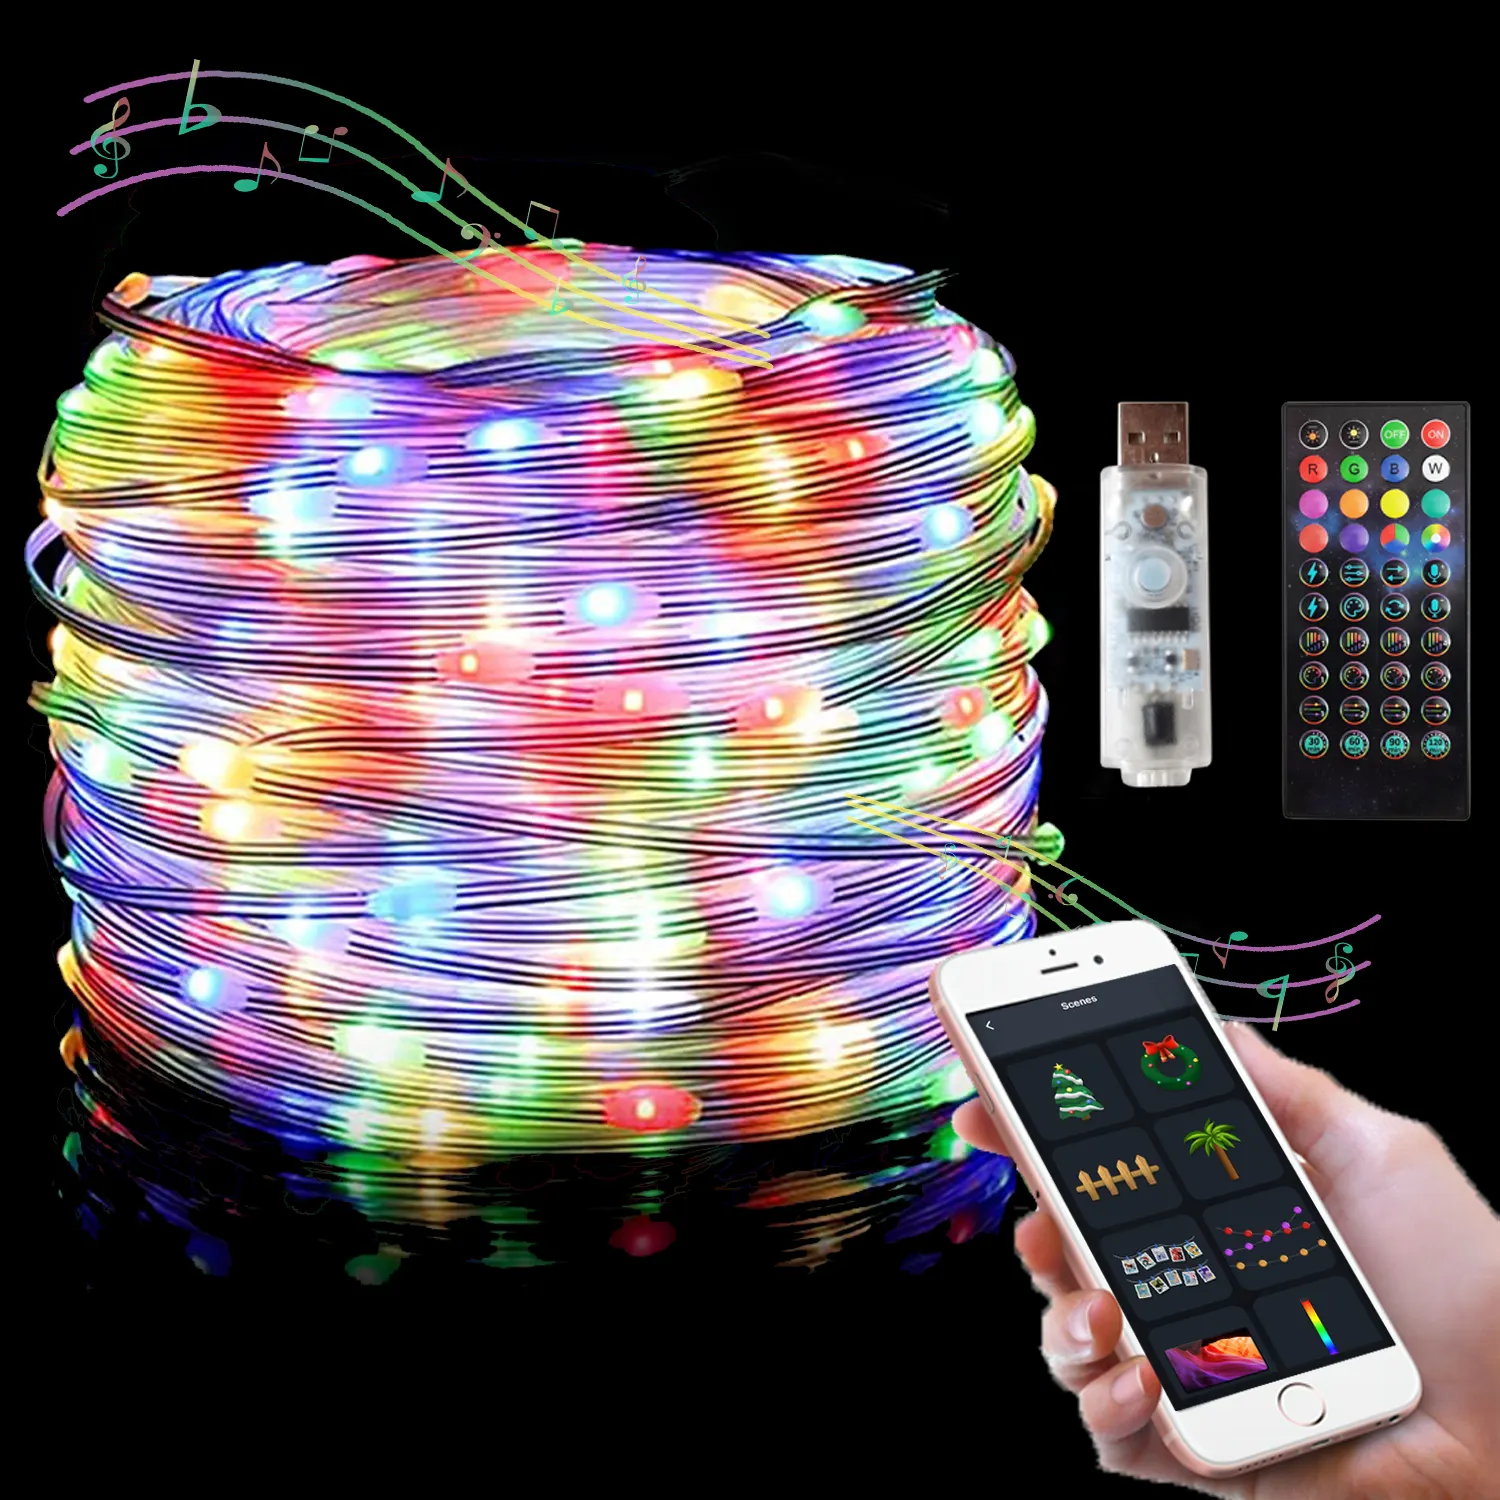 Smart Pixel WiFi USB And Remote Control Christmas LED Lighting With Music Mode RGB Colour Changing Timer